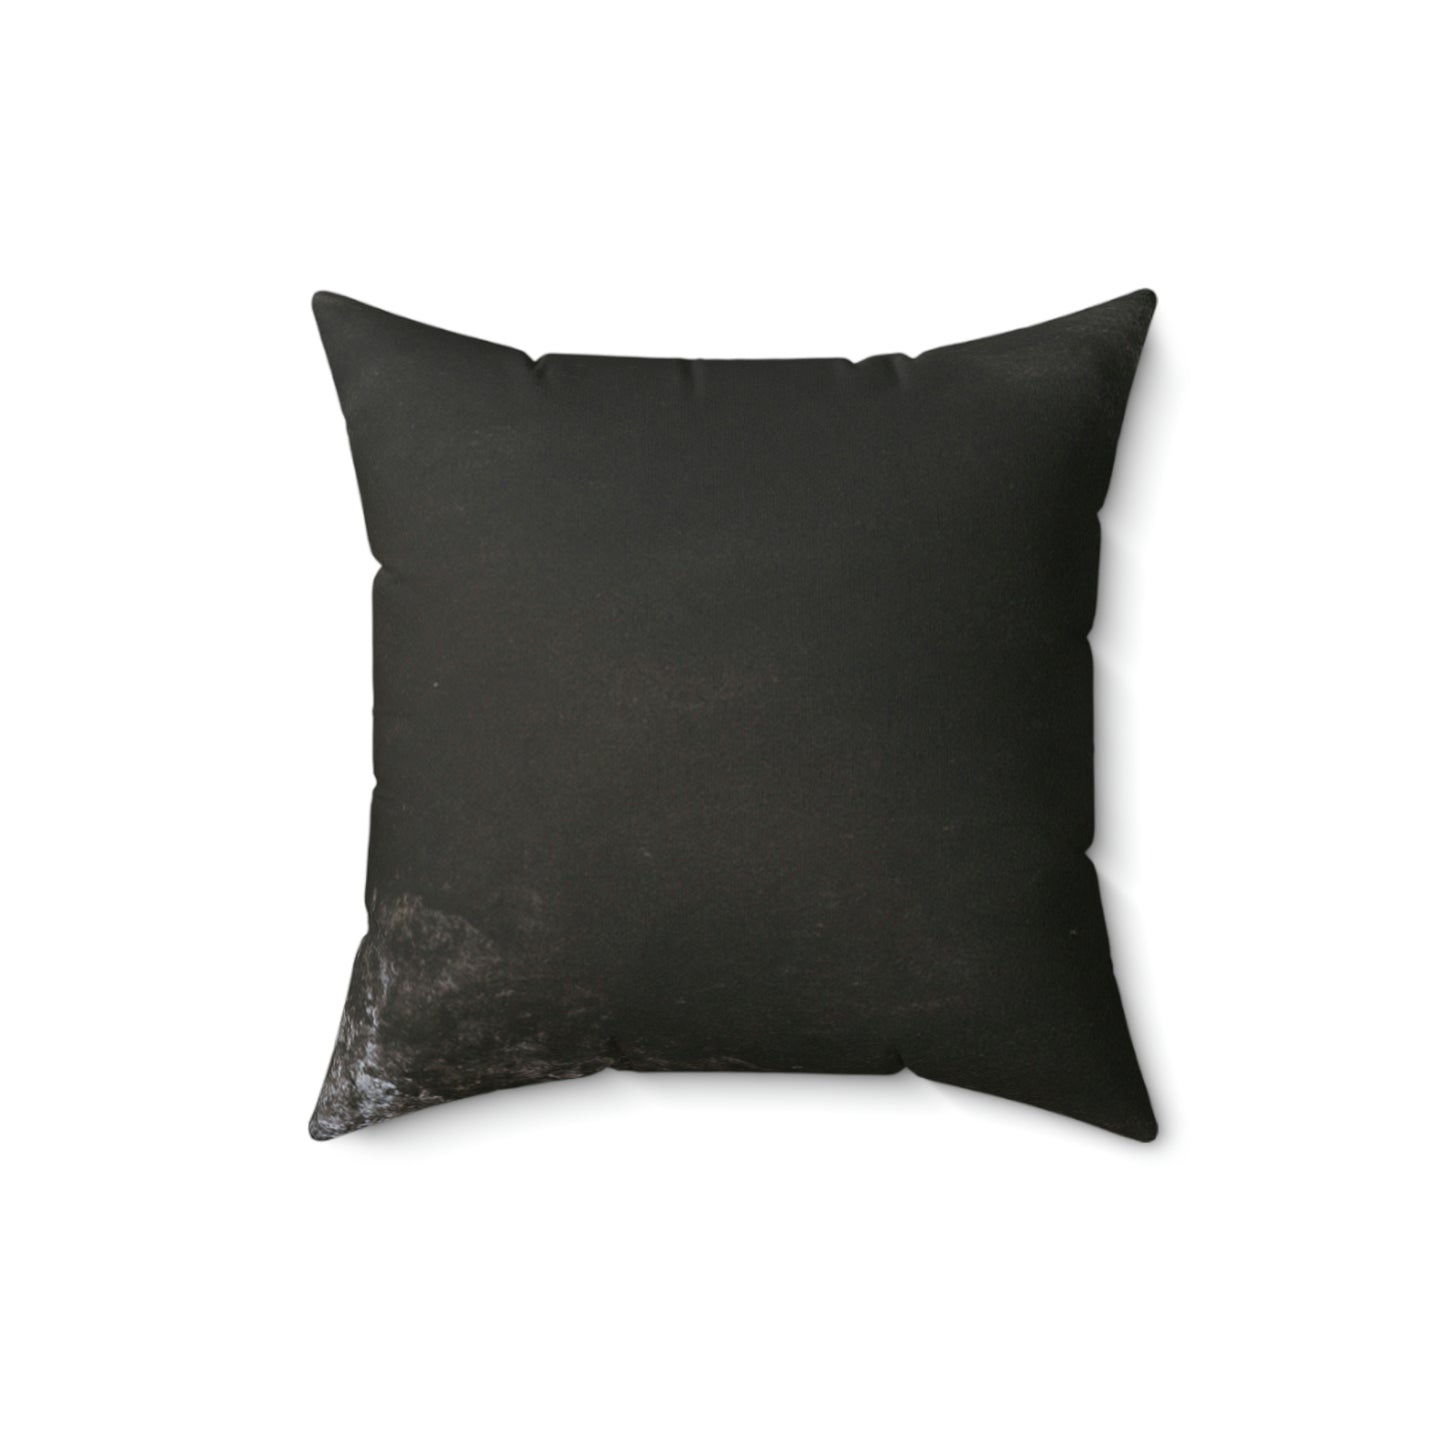 "Lost in the Depths" - The Alien Square Pillow